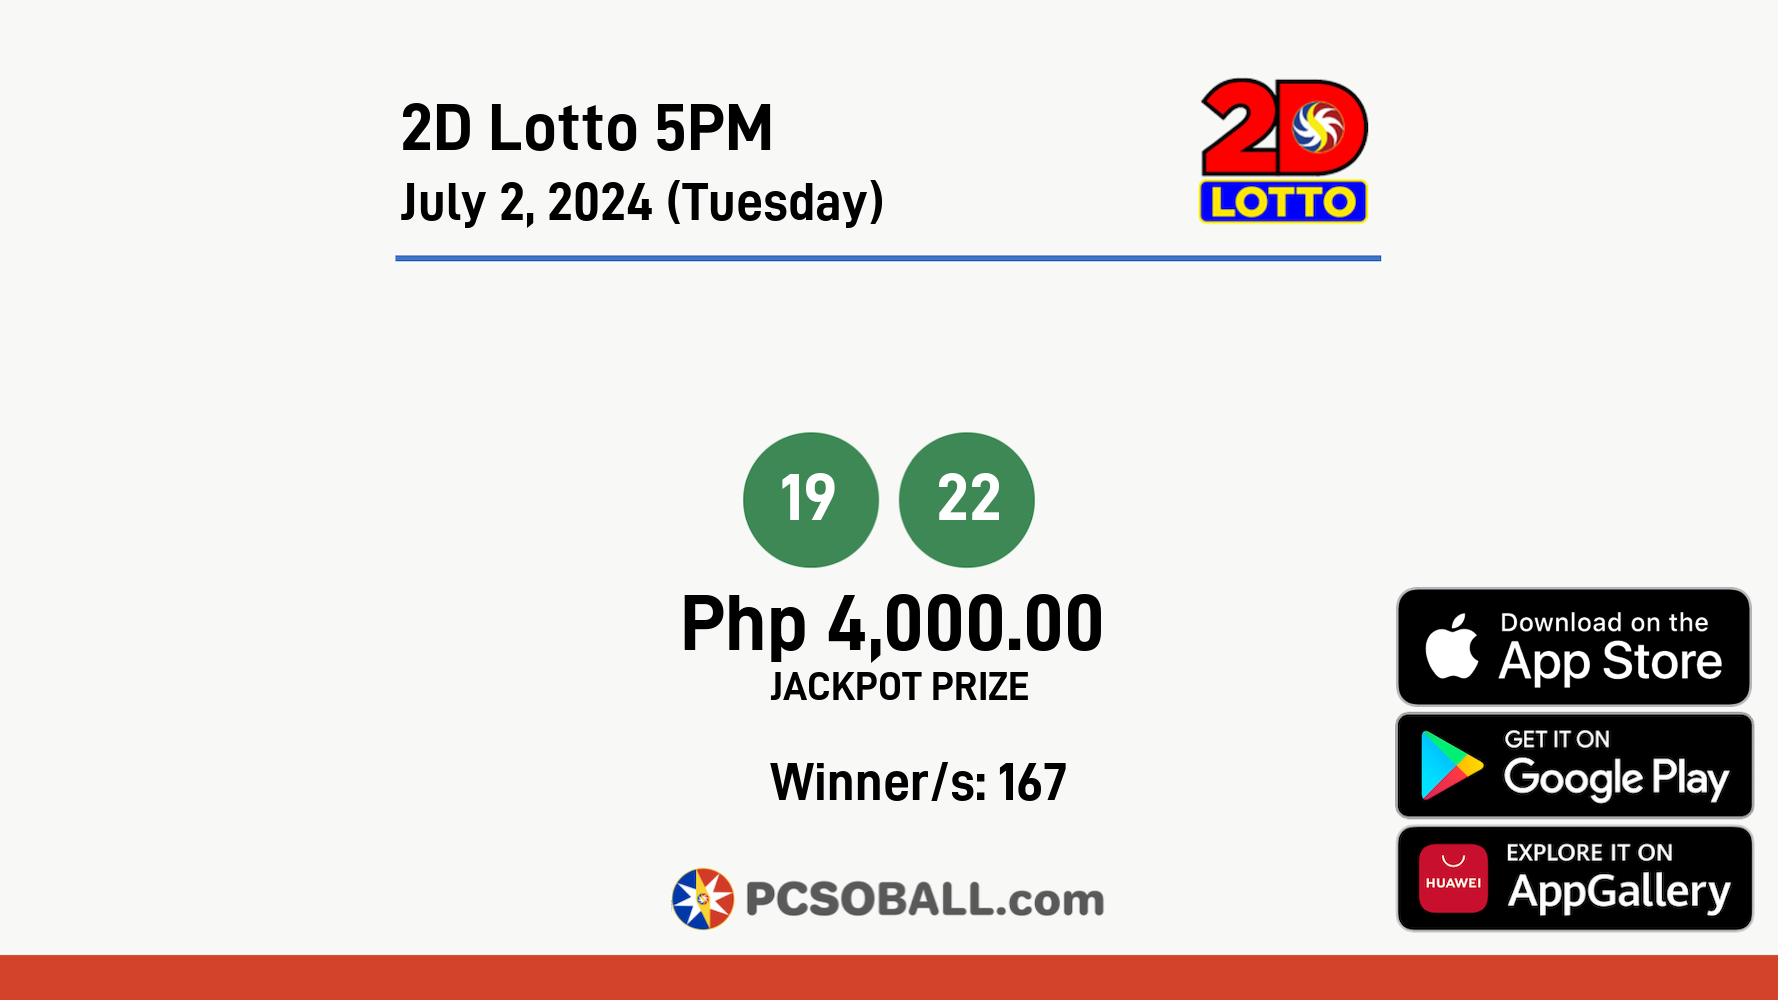 2D Lotto 5PM July 2, 2024 (Tuesday) Result